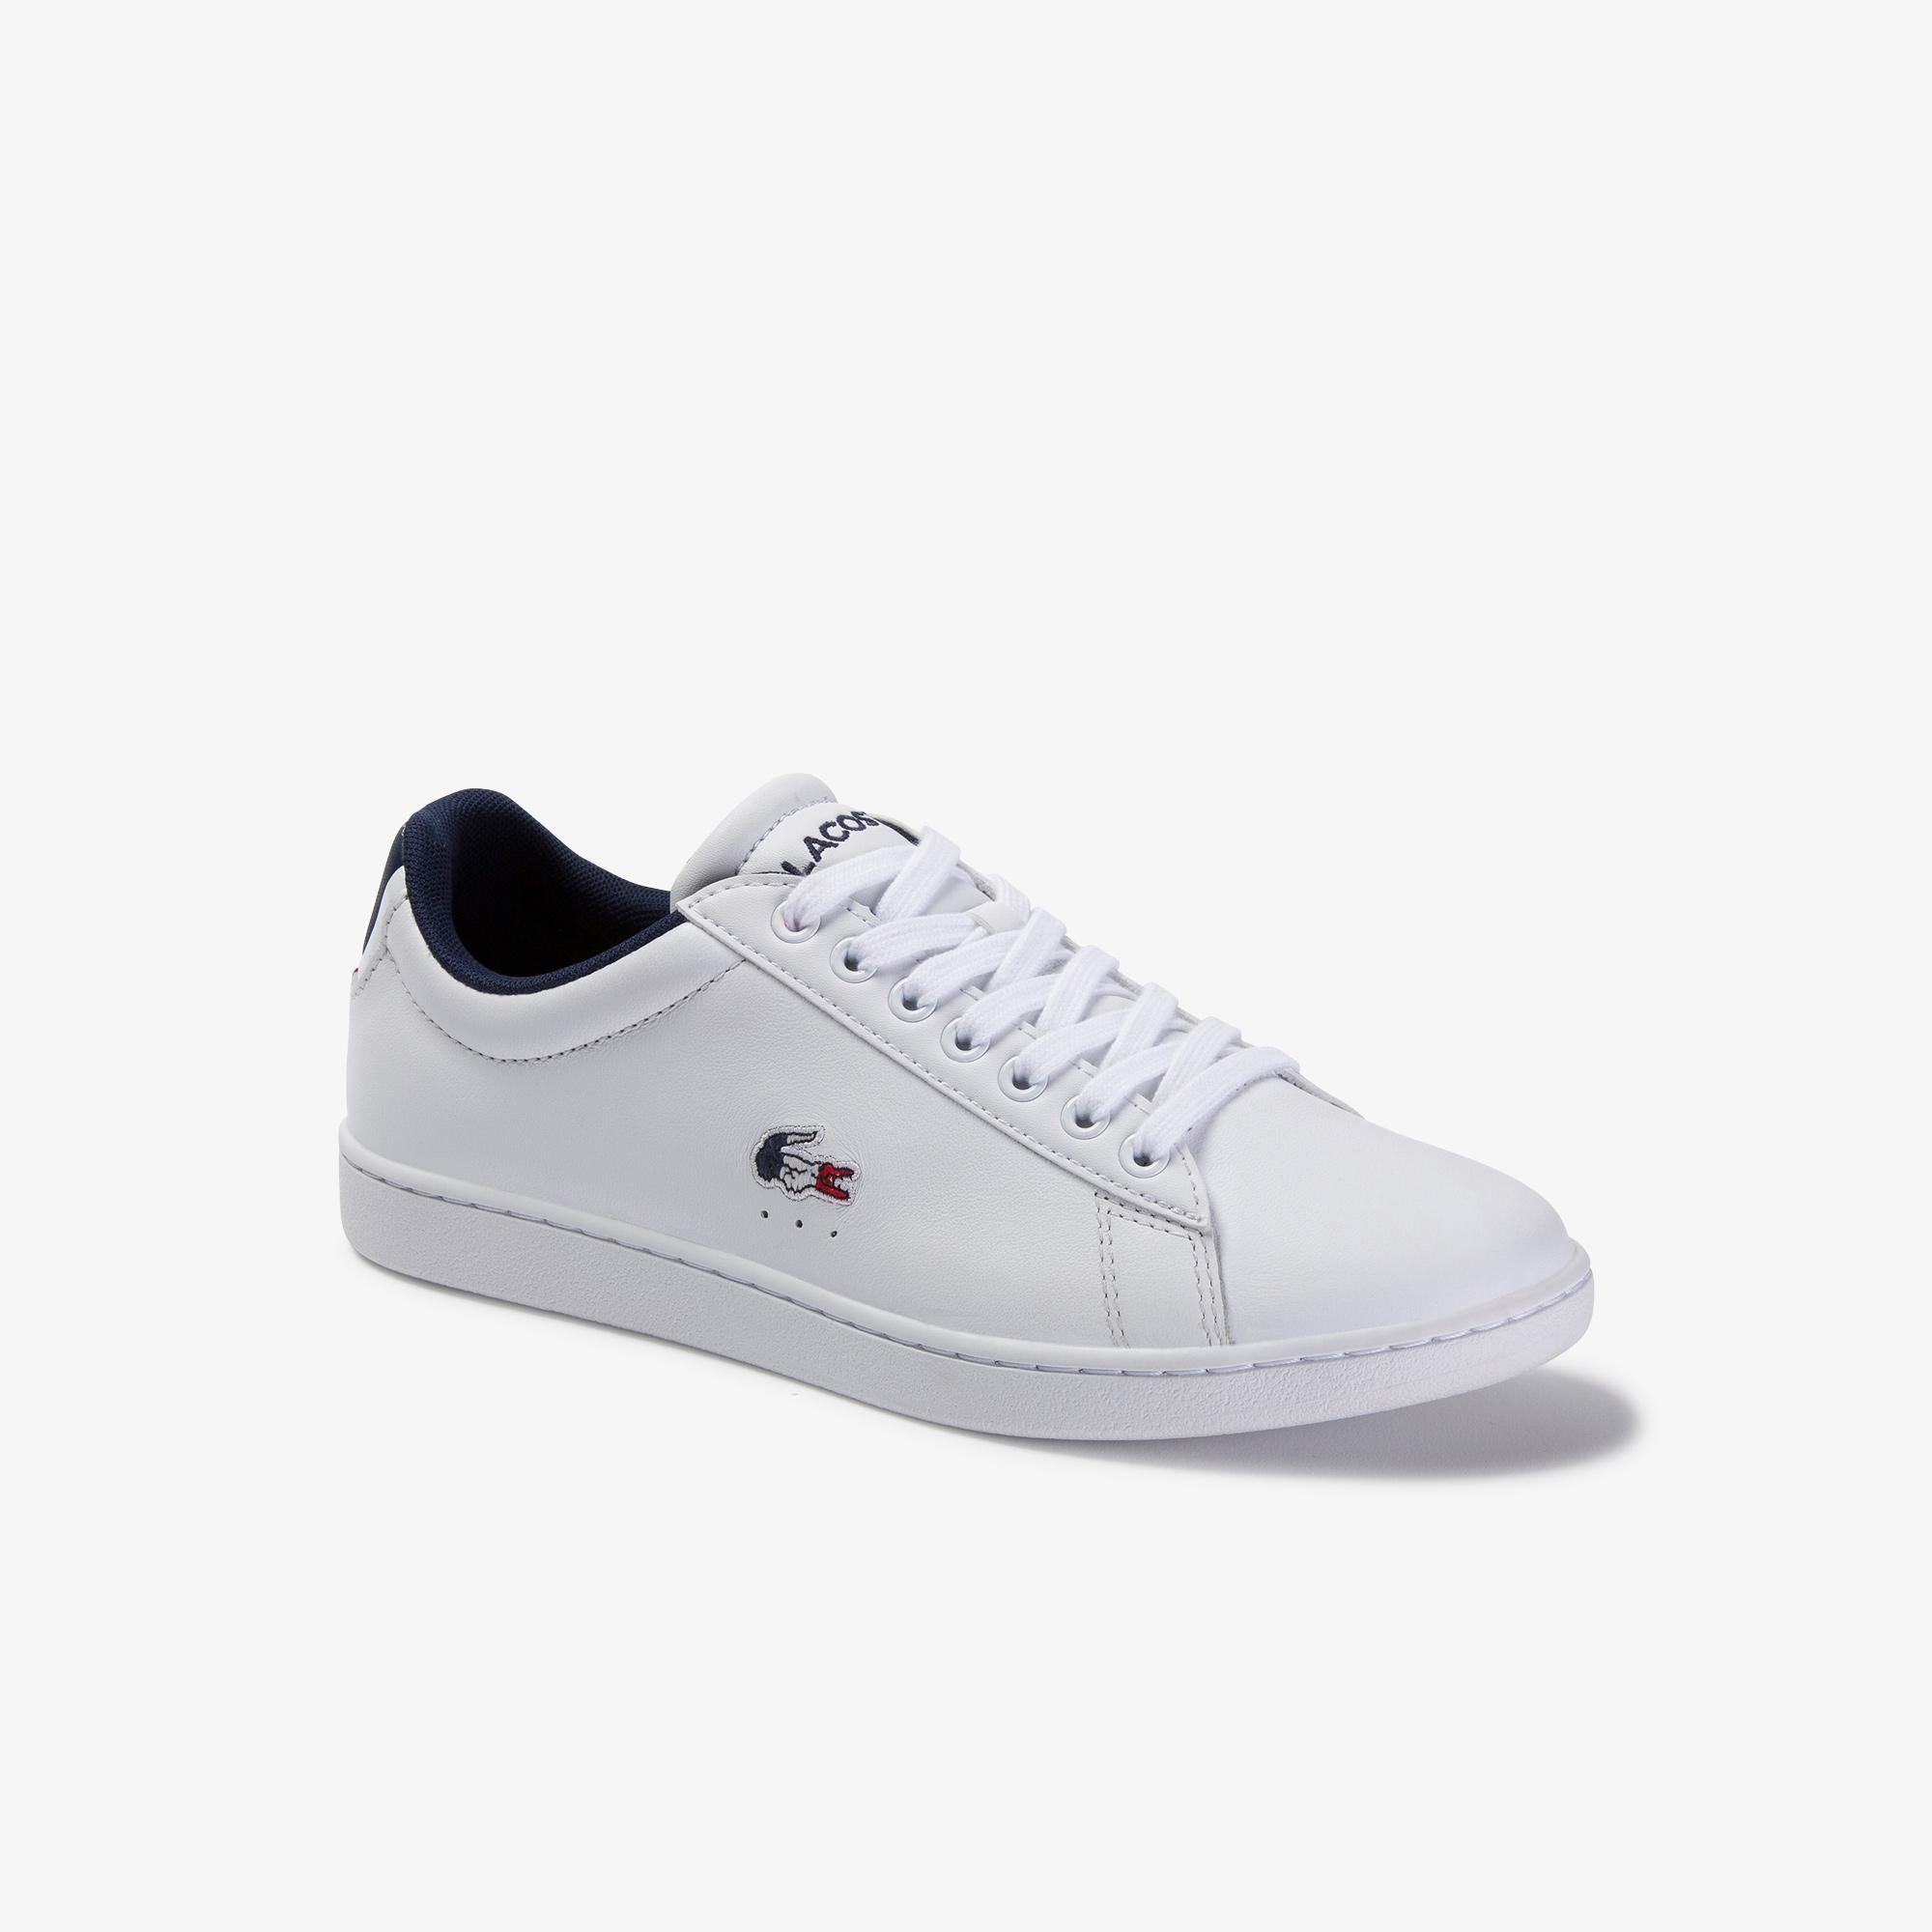 Lacoste Women's Carnaby Evo Tricolore Leather and Synthetic Trainers